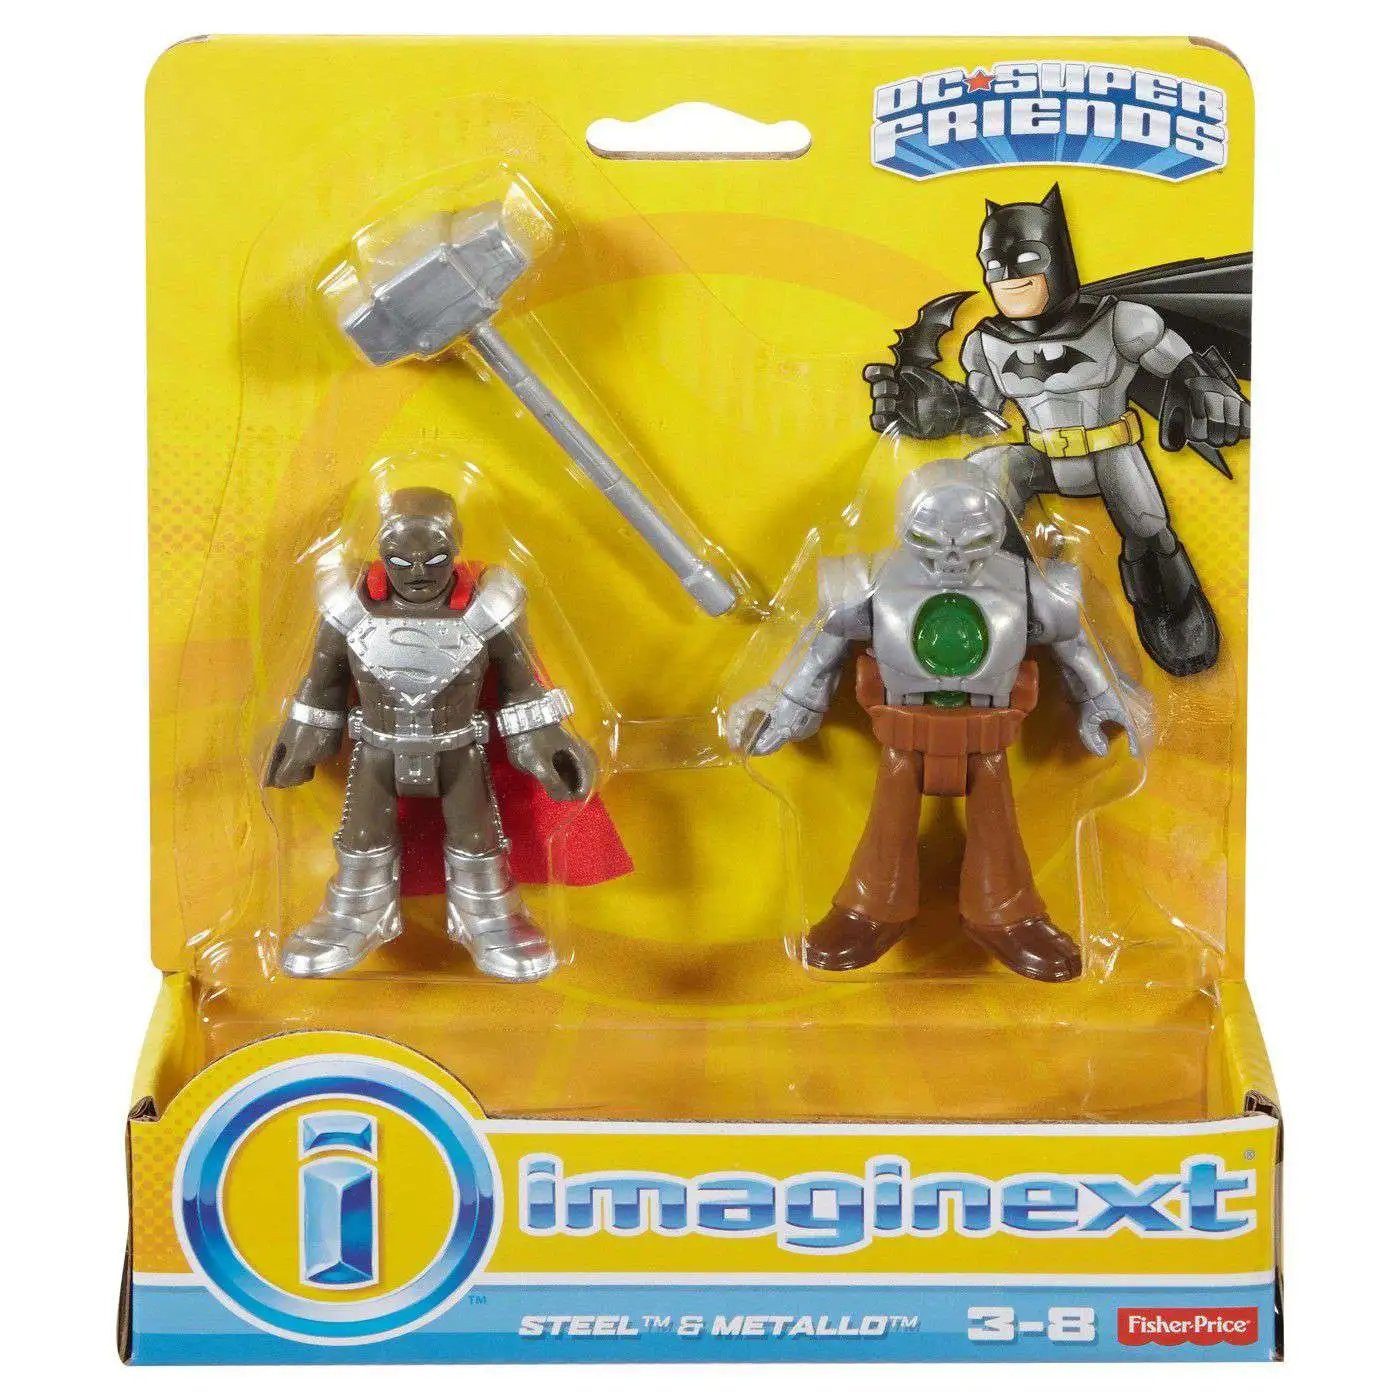 Fisher Price Imaginext DC Super Friends Gotham City Bane Motorcycle cycle vest 